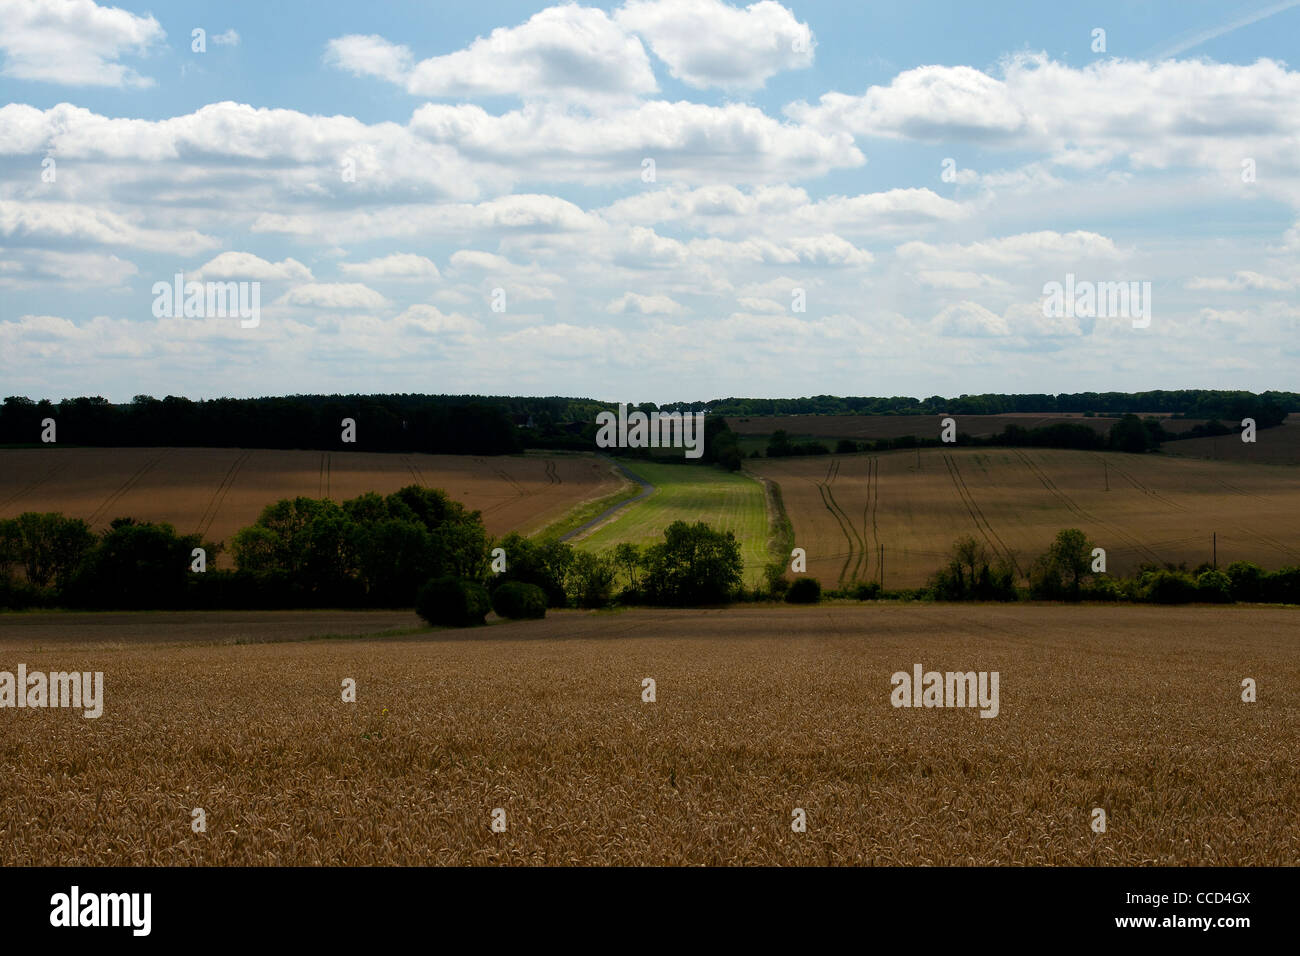 A view over golden fields on a sunny day. Stock Photo